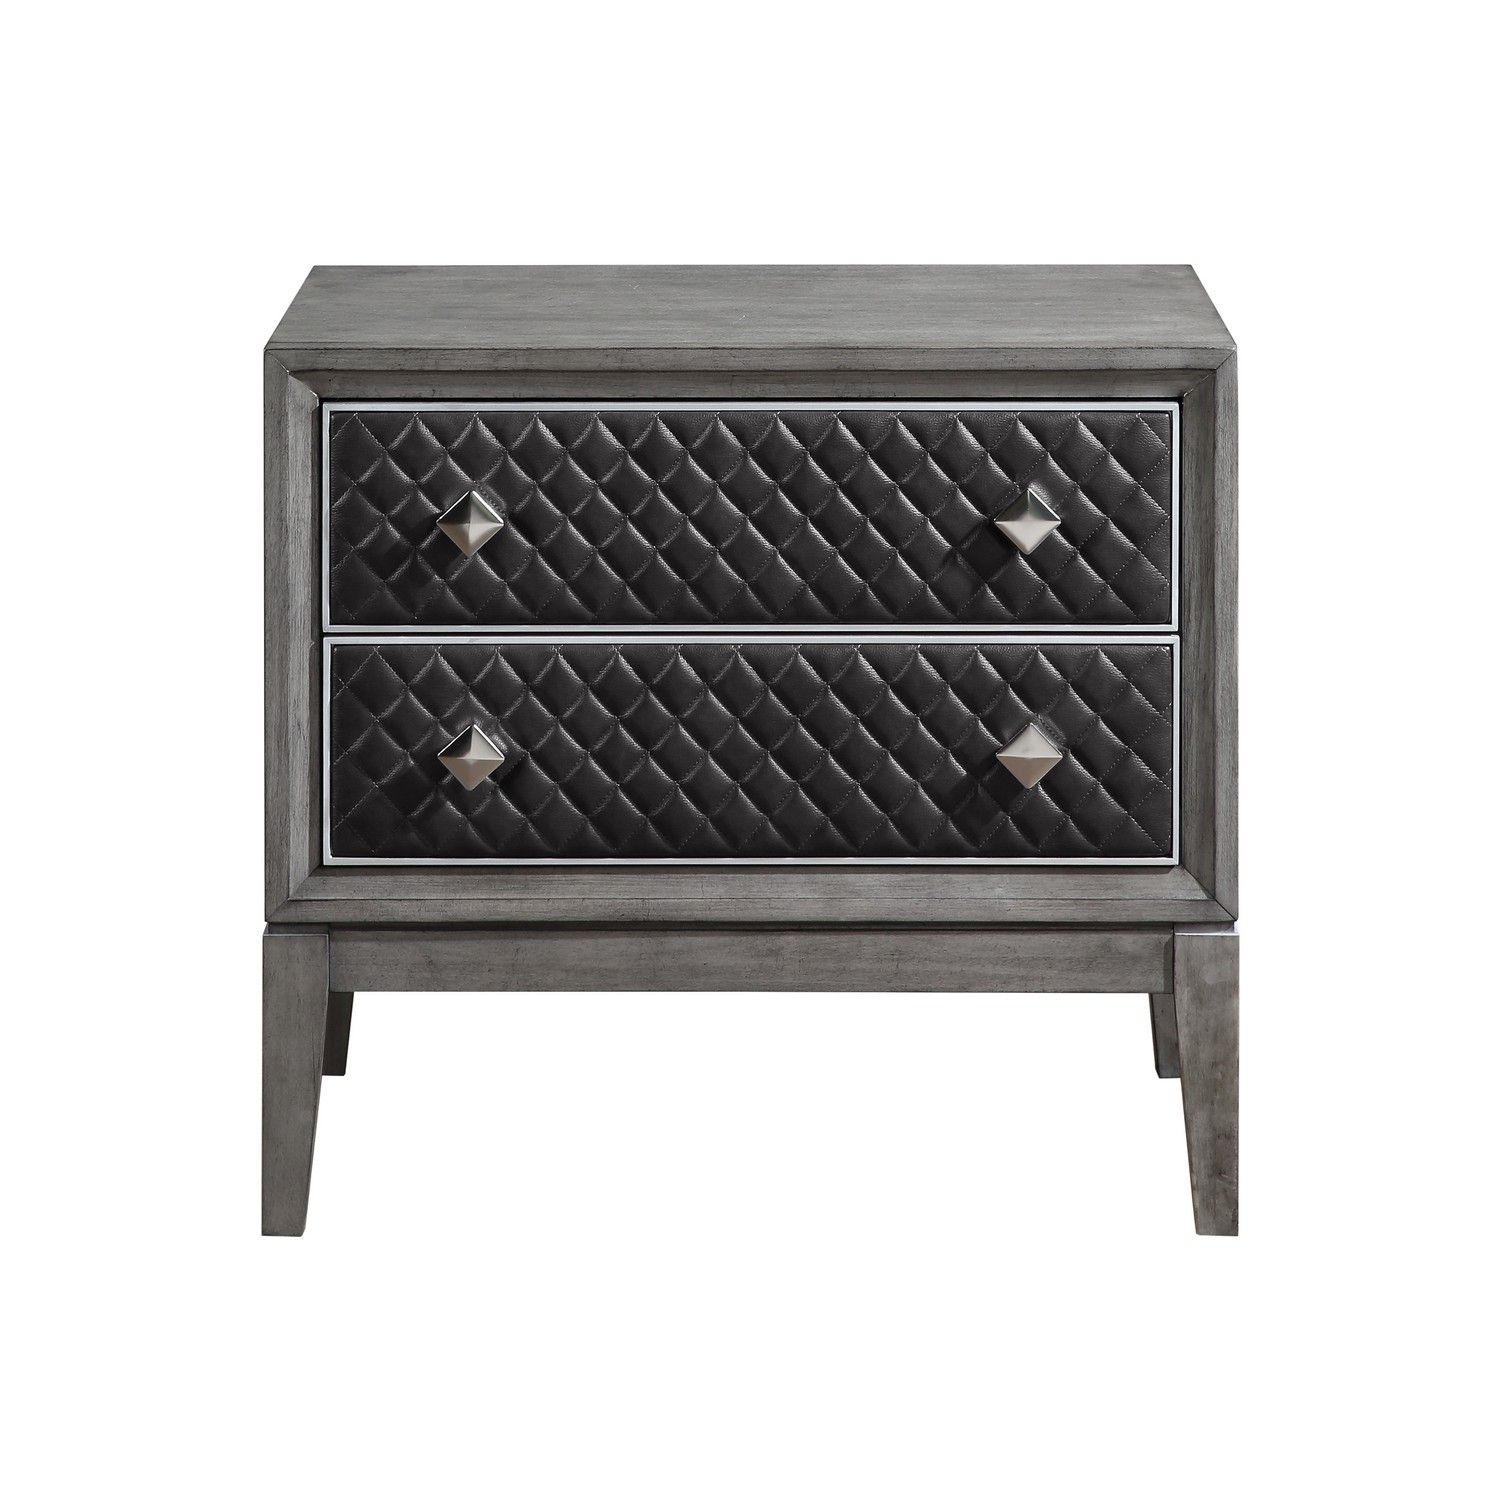 Homelegance West End Night Stand - Wire-brushed Gray